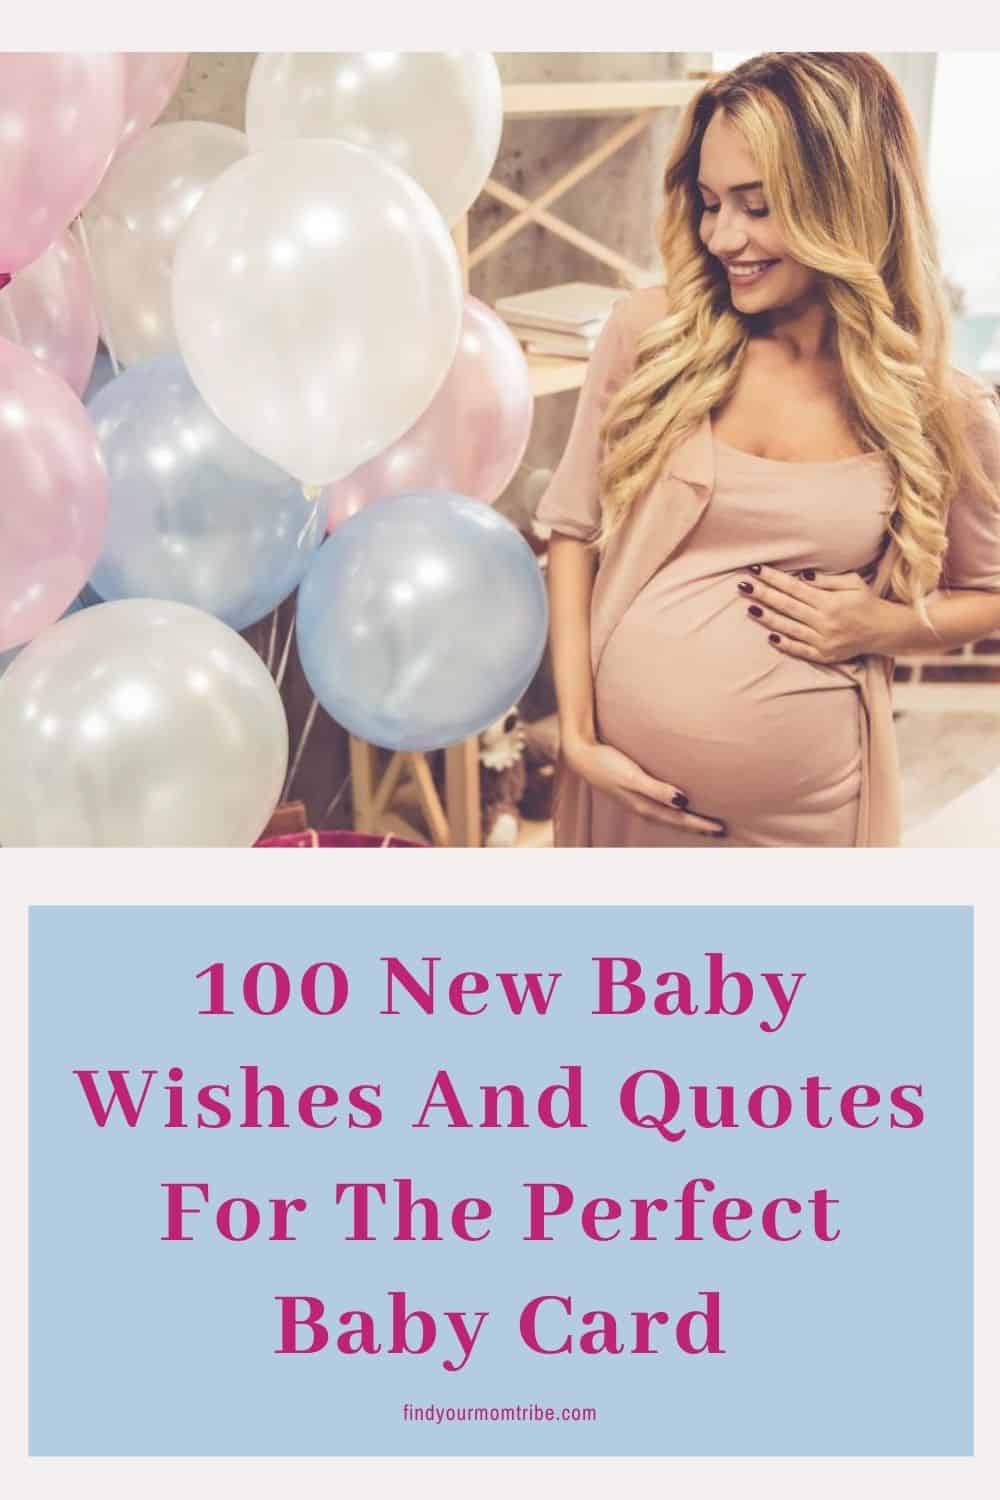 100 New Baby Wishes And Quotes For The Perfect Baby Card